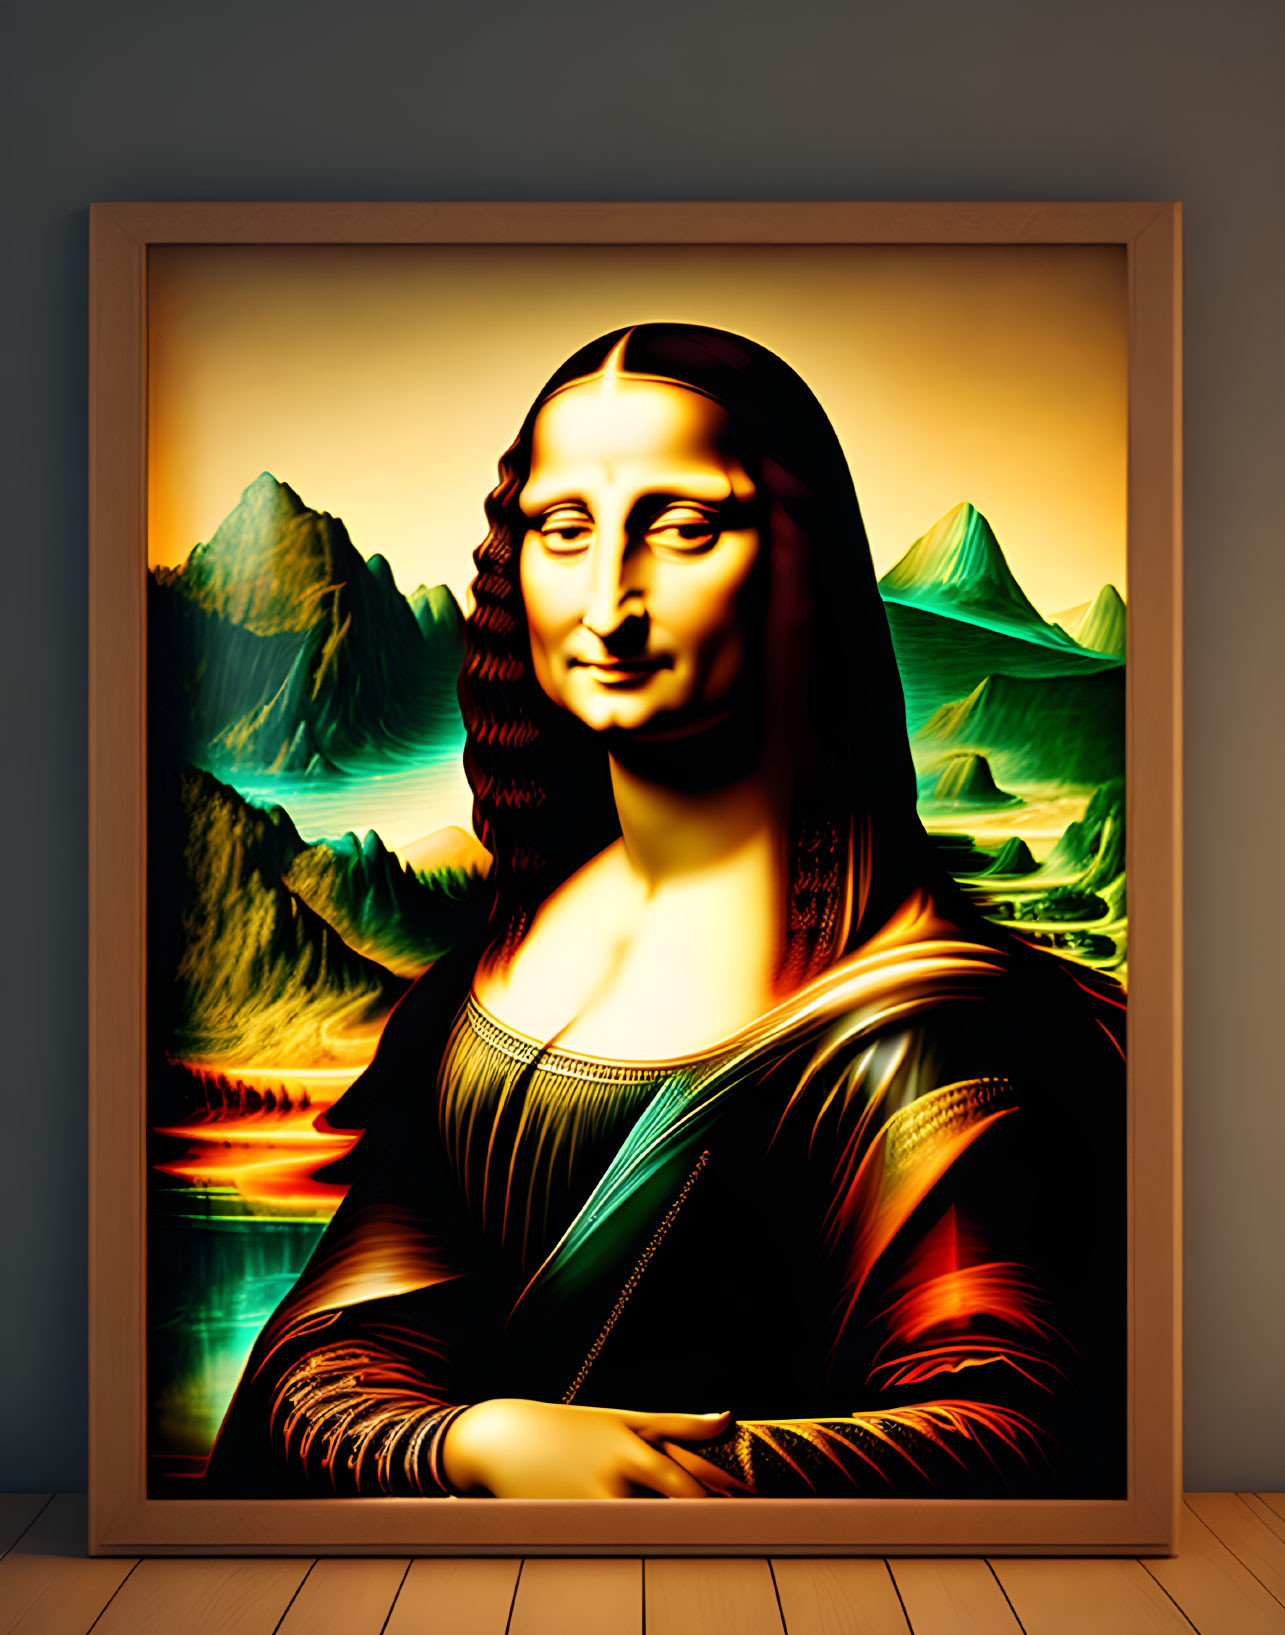 Stylized Mona Lisa image with artificial lighting against a mountainous backdrop in wooden frame